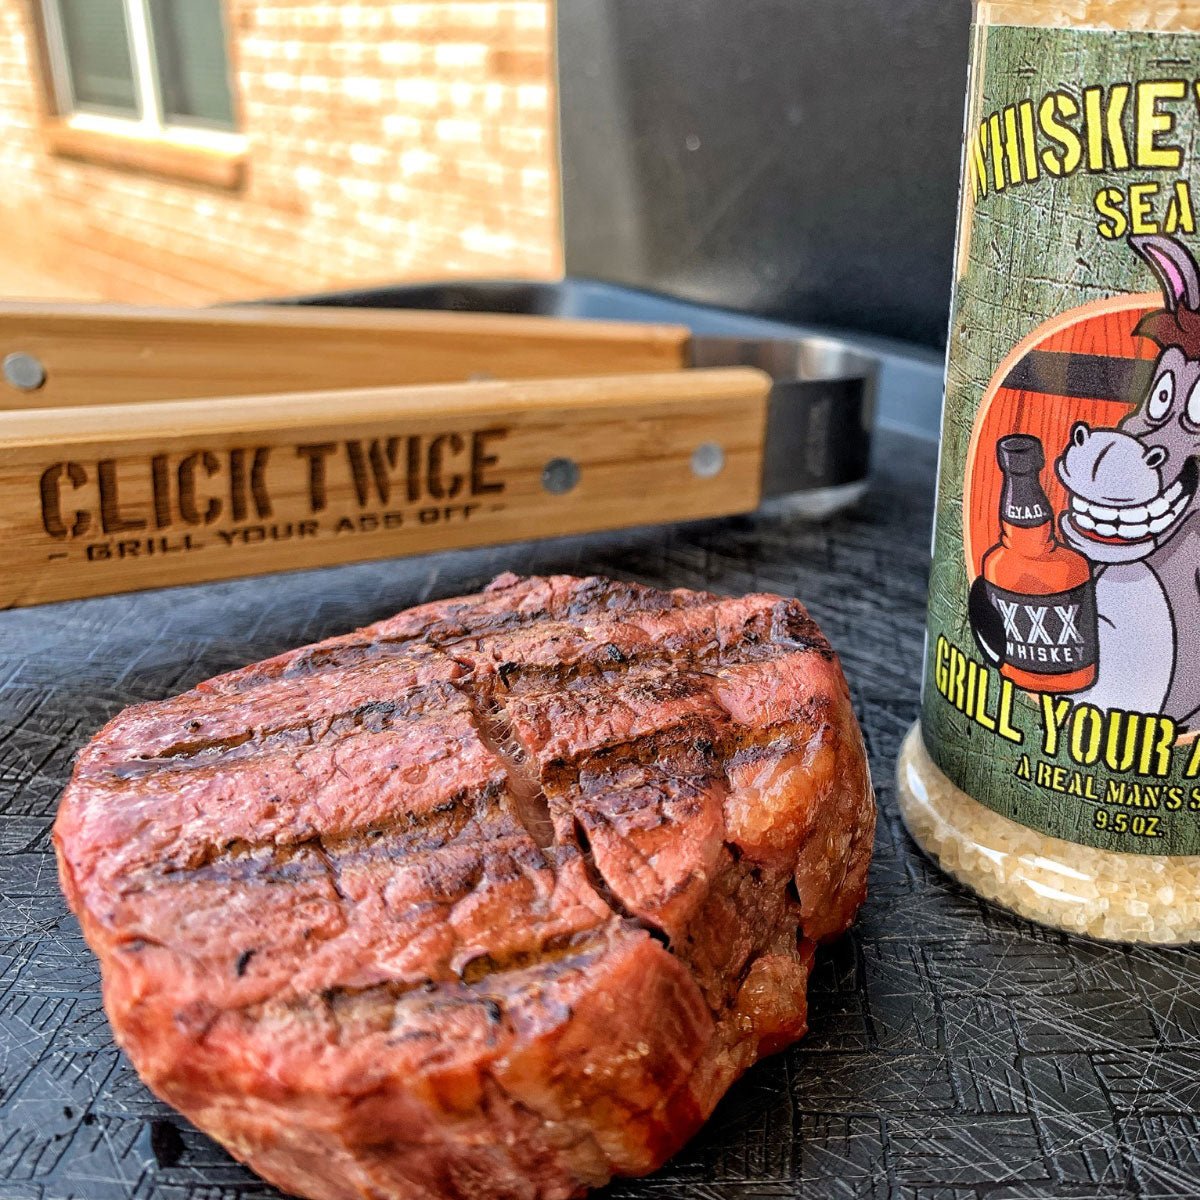 WHISKEY SMOKED SEA SALT - Grill Your Ass Off